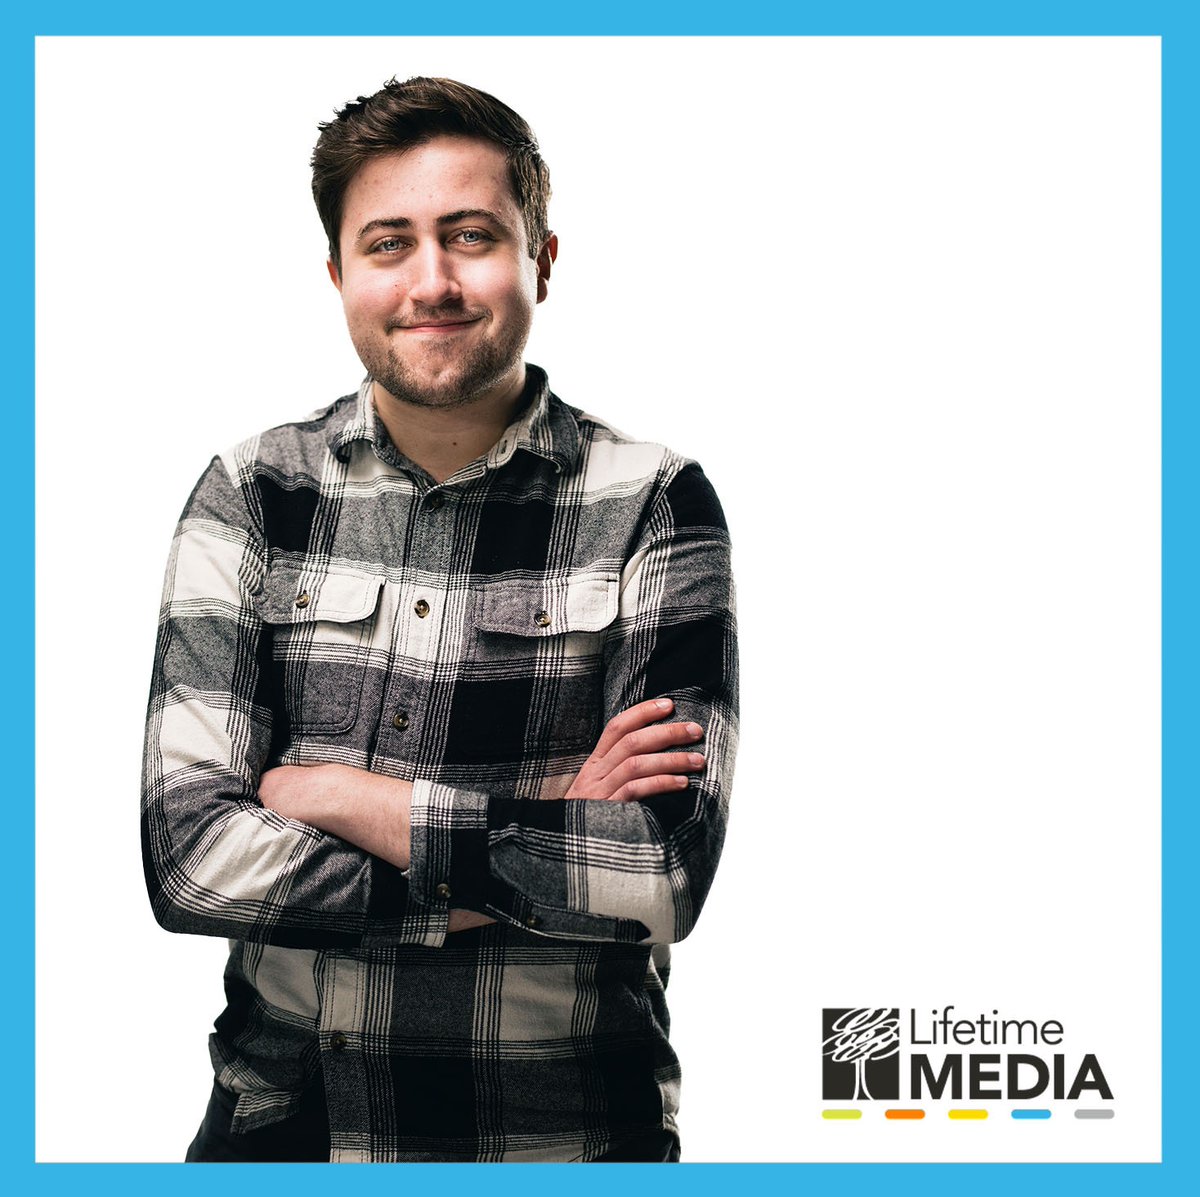 It’s the first day of March, but more importantly it’s JAKE’S BIRTHDAY!! 🥳

Drop a comment below screaming at Jake. (Nice screams only)

#lifetimemediastl #videoproduction #stl #stlouis #stlvideo #marketing #media #videocrew #editor #wellnesswednesday #march #stlvideoproduction